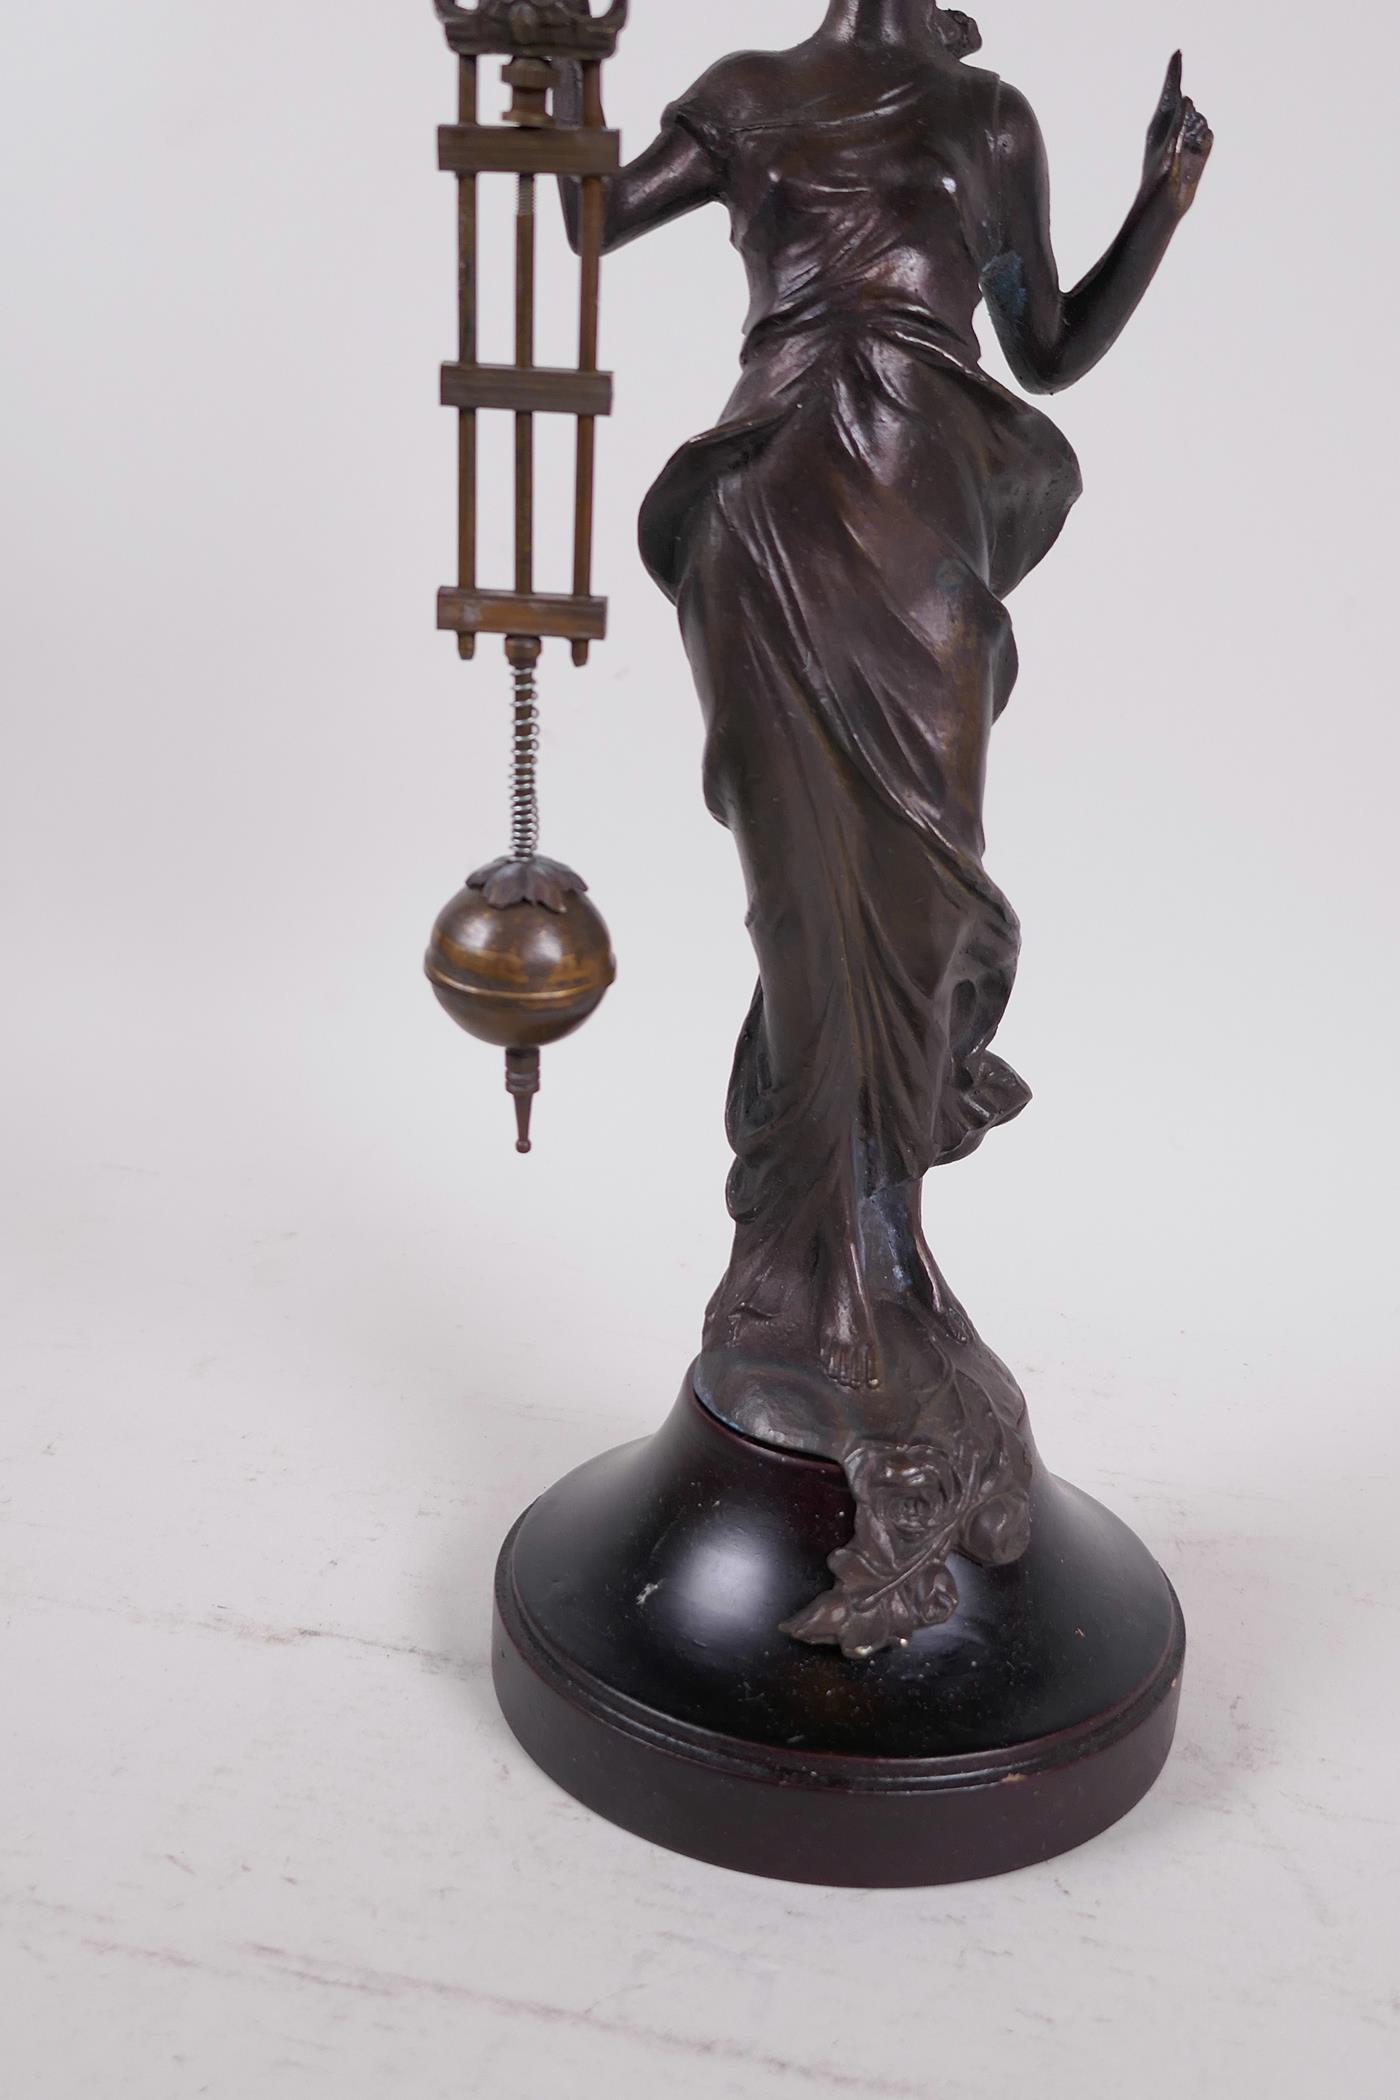 A bronze mystery clock cast as an Art Nouveau style lady with the clock raised on one arm, 13" high - Image 4 of 4